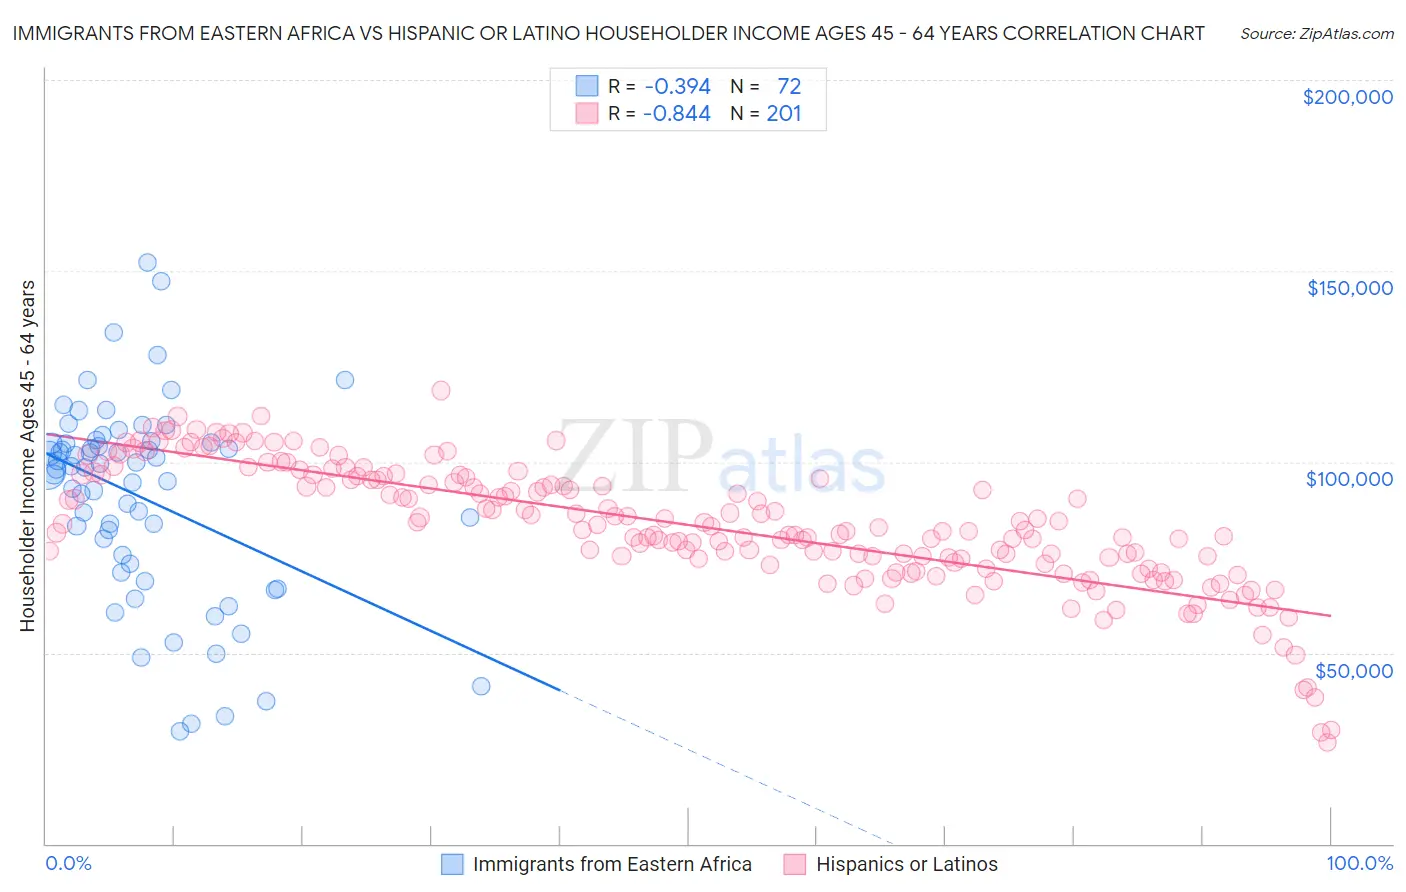 Immigrants from Eastern Africa vs Hispanic or Latino Householder Income Ages 45 - 64 years